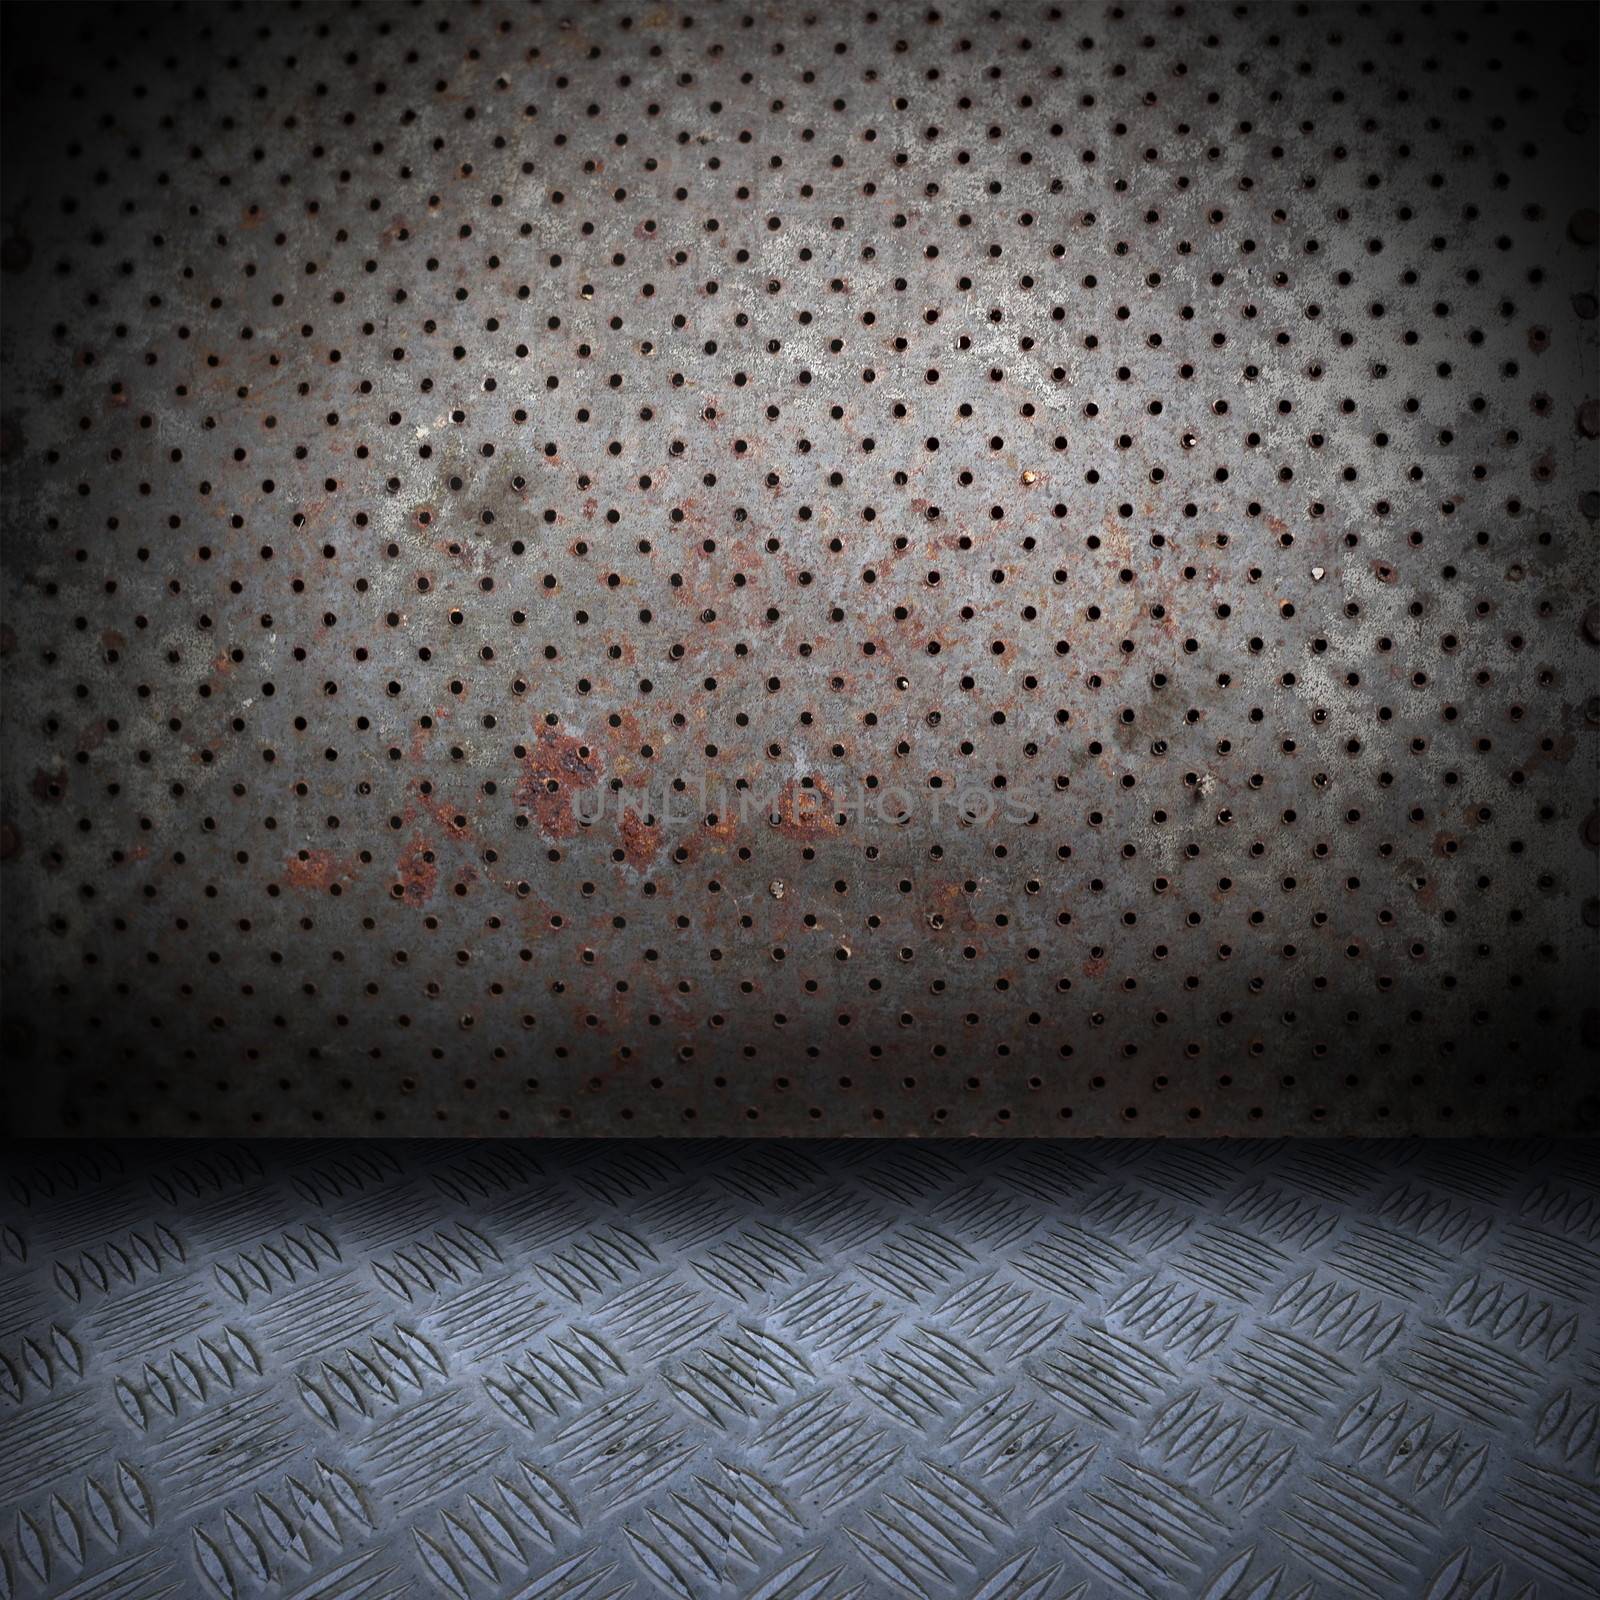 industrial background - empty interior finished with metallic surfaces